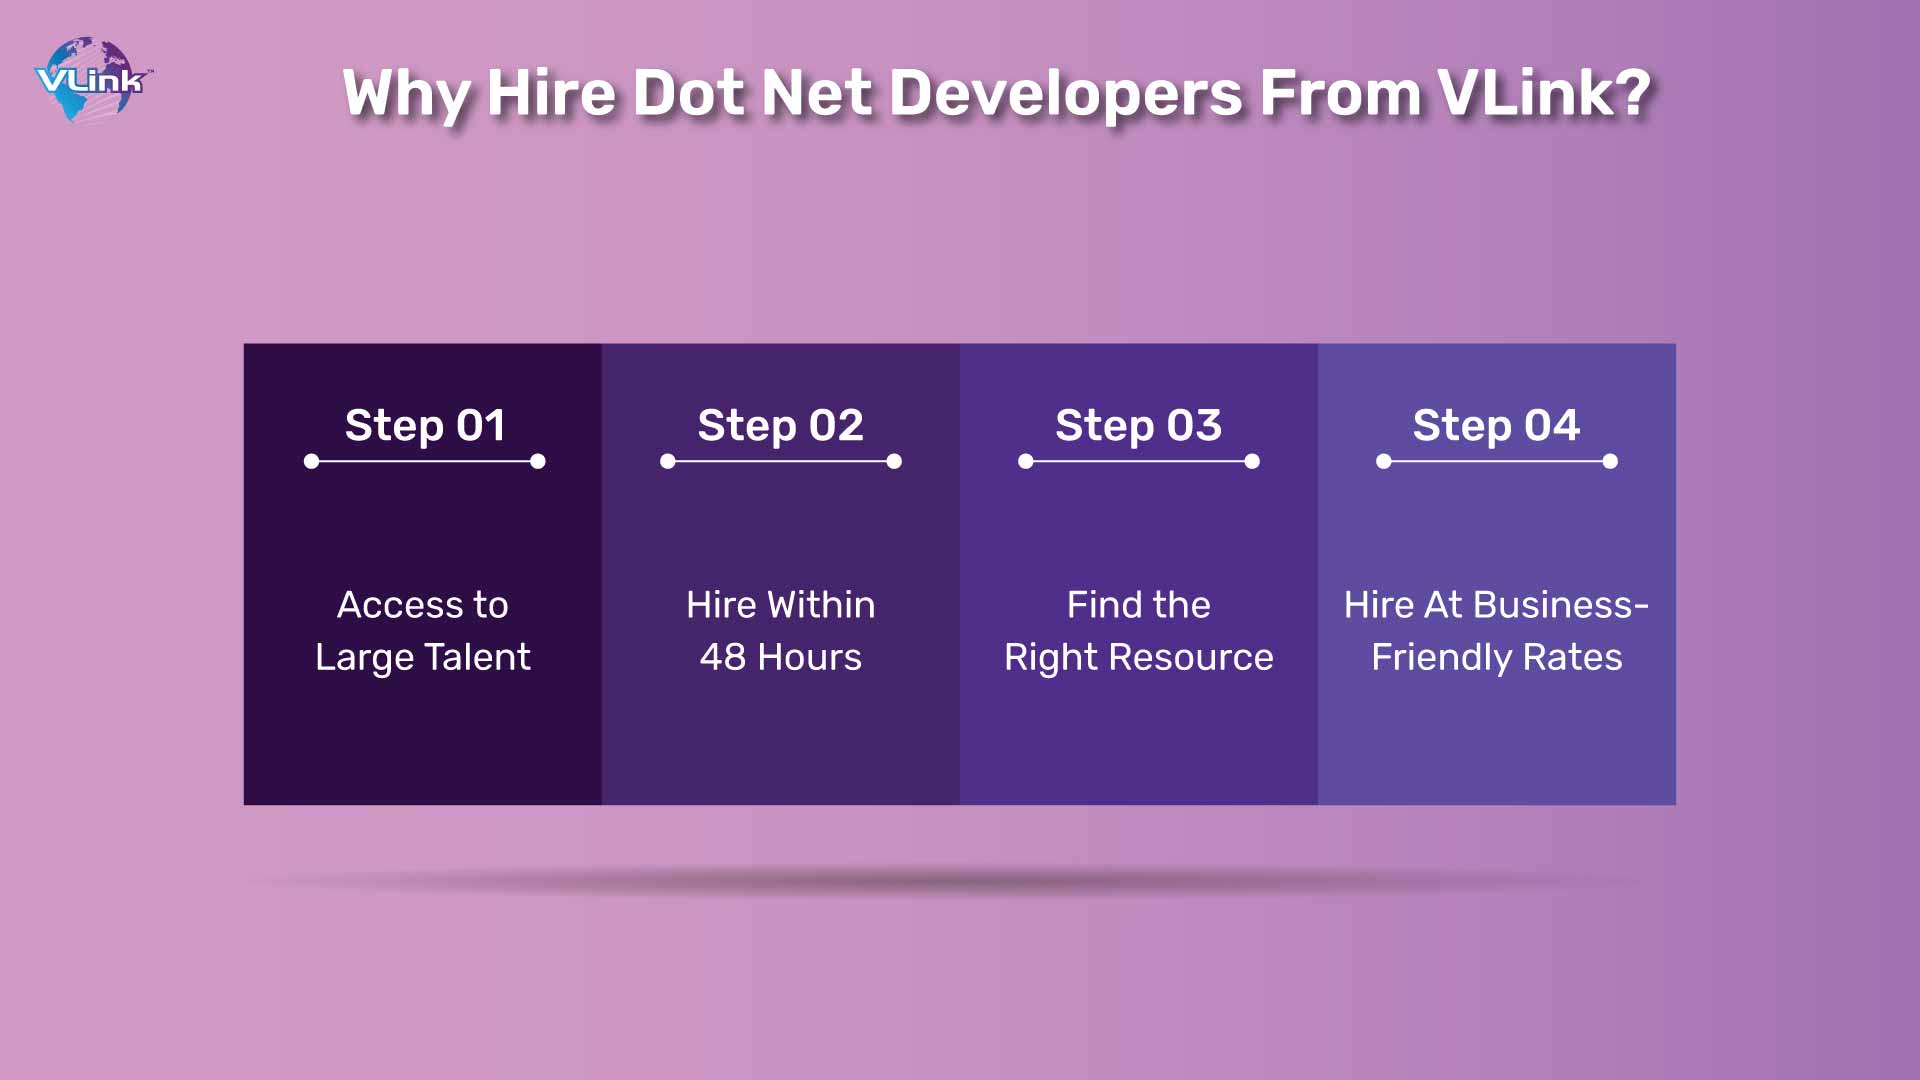 Where Should You Hire the Right Dot Net Developer